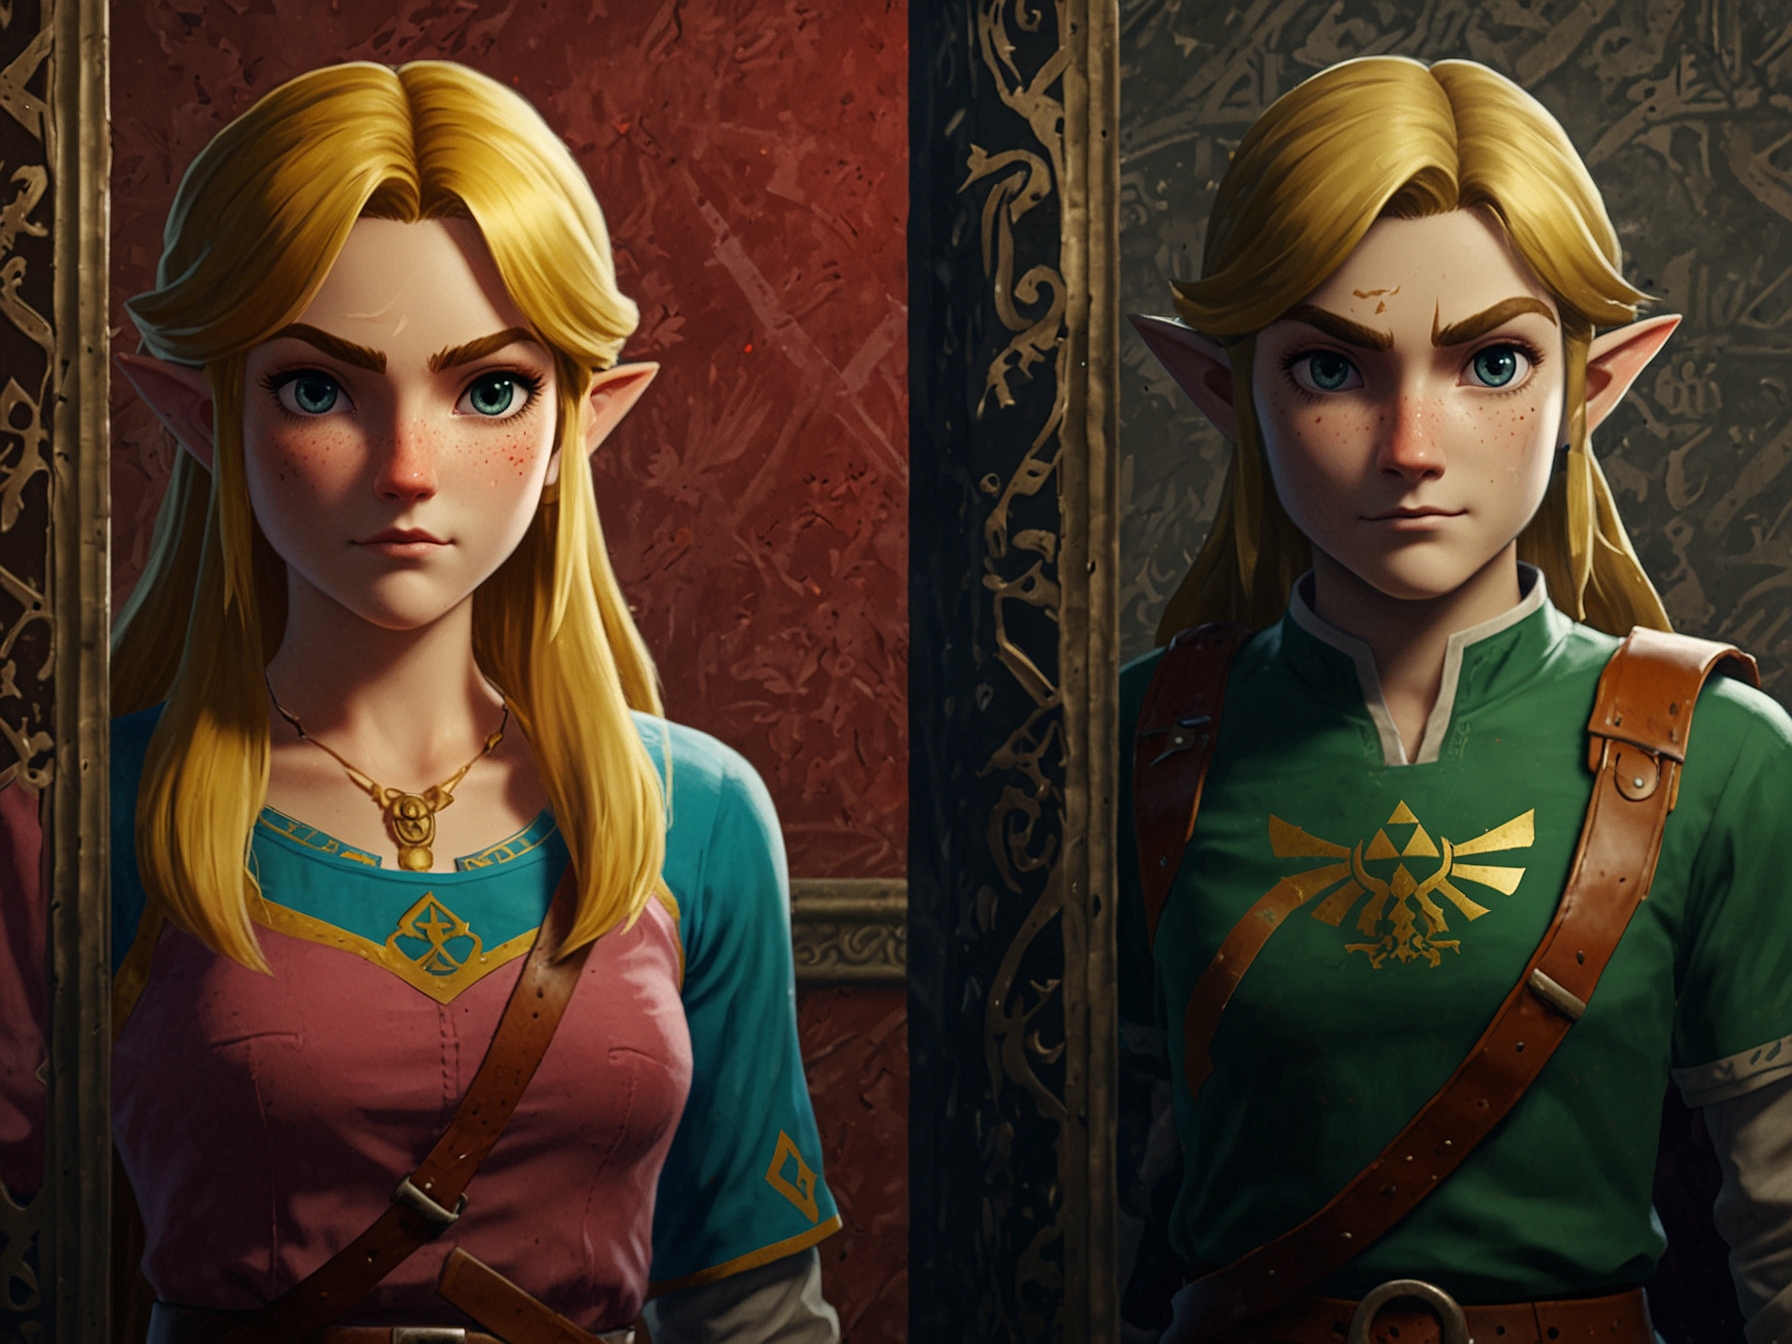 A split-screen image showing trailers of 'The Legend of Zelda: Tears of the Kingdom' and Elden Ring DLC 'The Scarlet Court' revealed during June's gaming showcases.